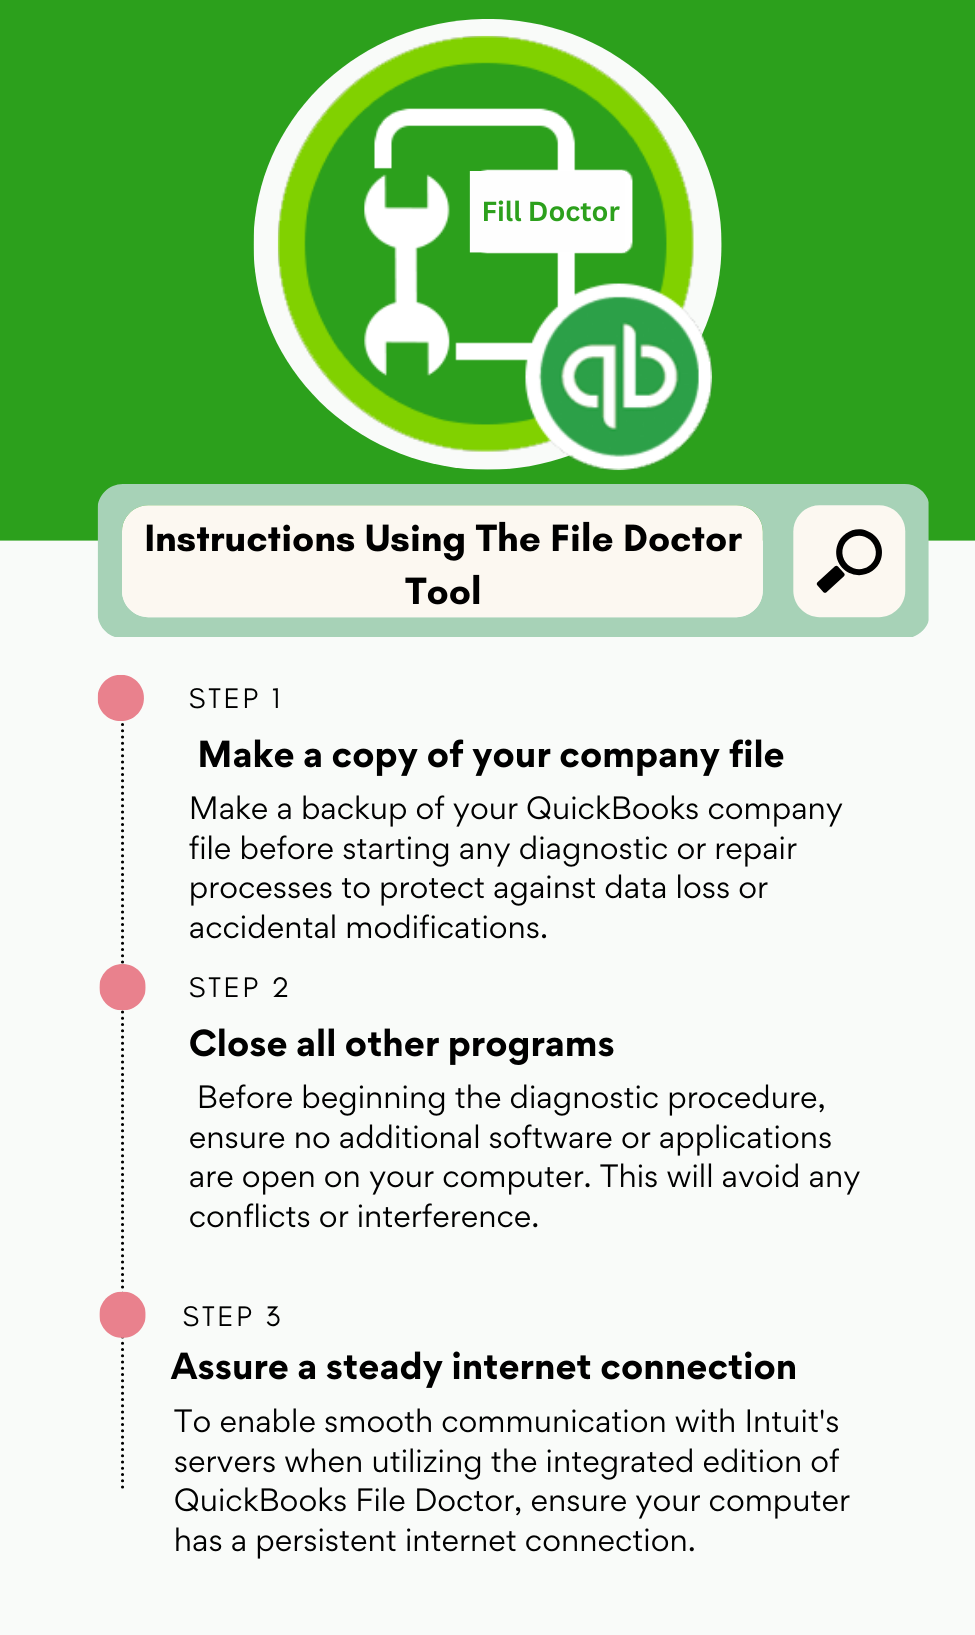 Instructions Using The File Doctor Tool